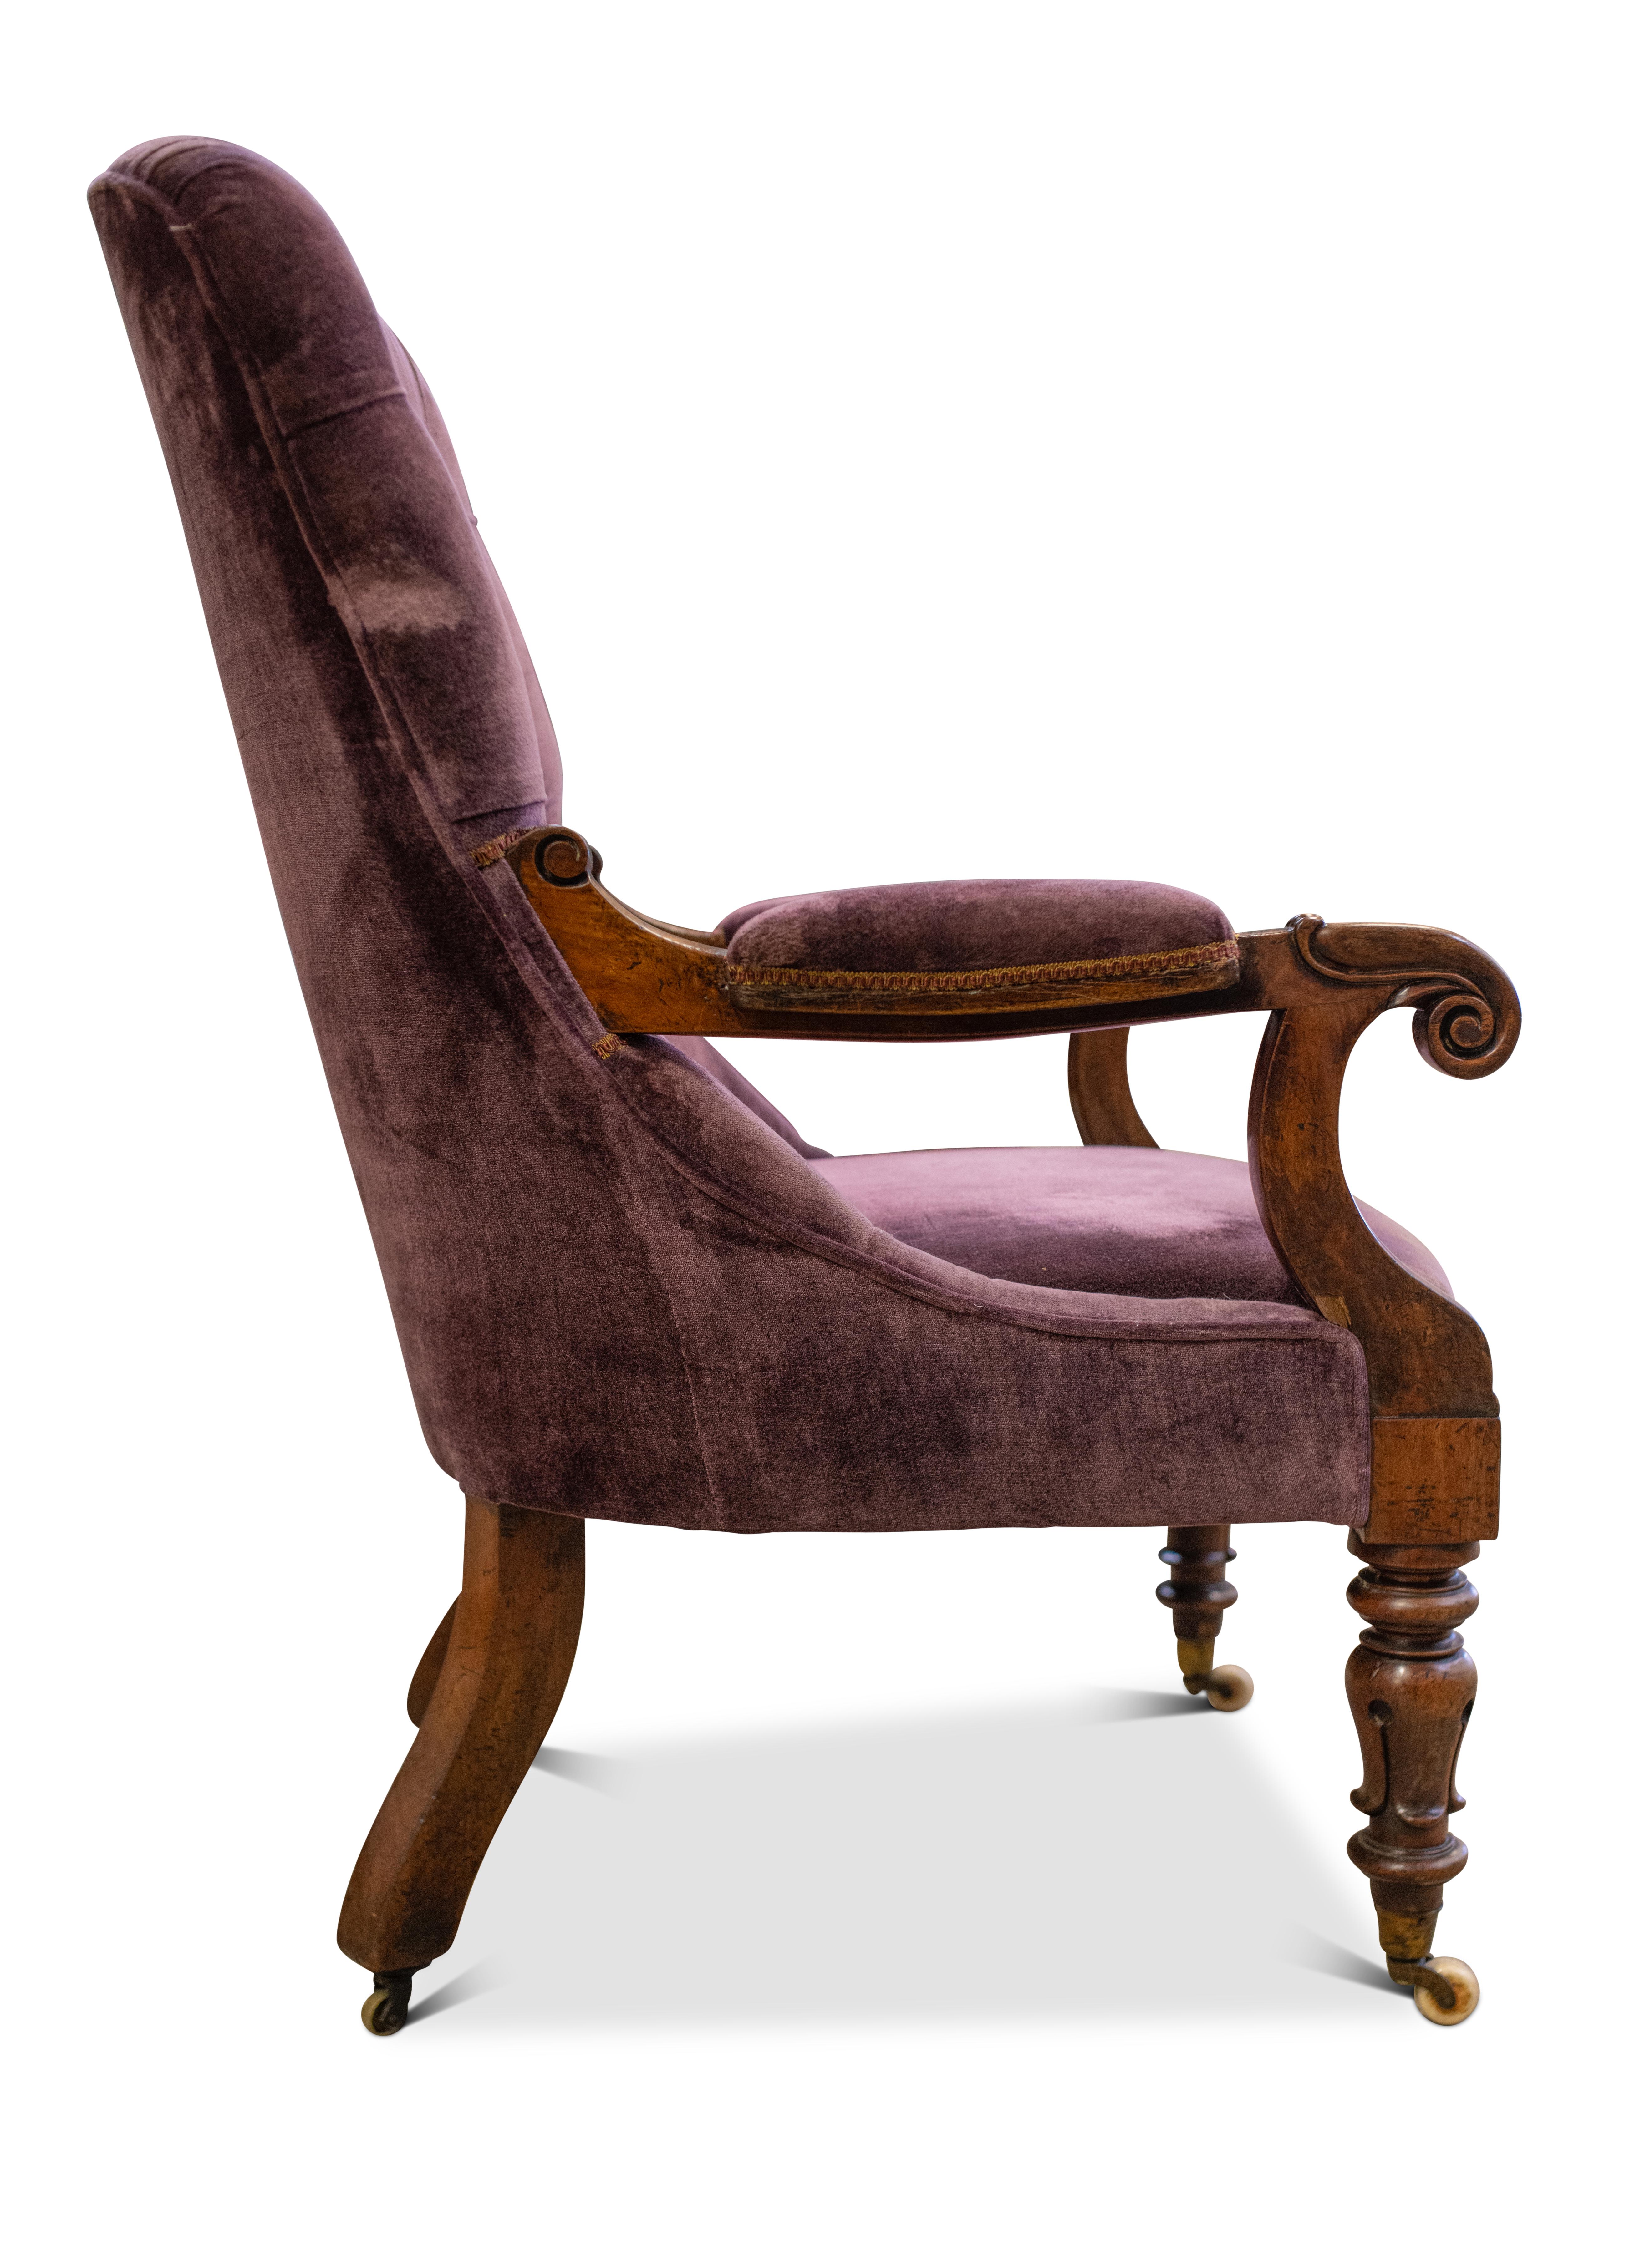 British William IV Velvet Scroll Arm Library Slipper Chair In The Manner of Gillows For Sale